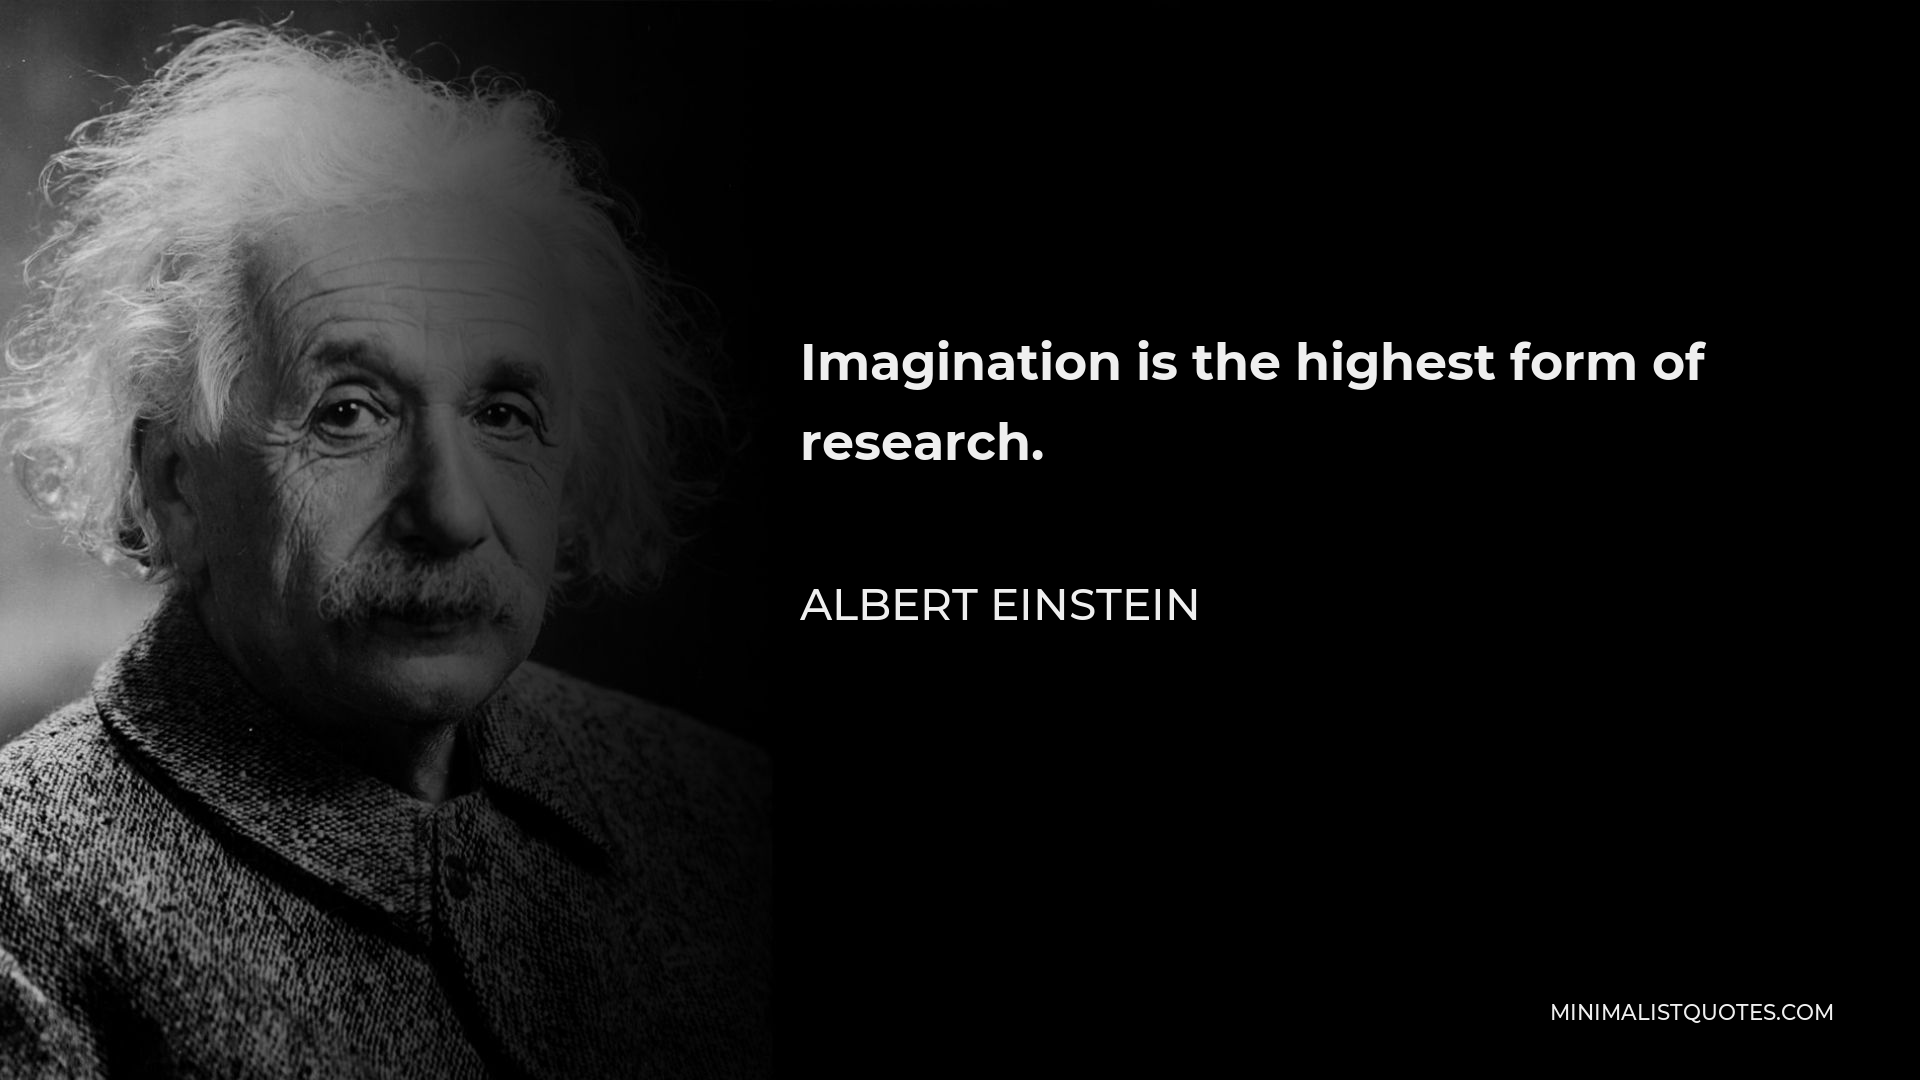 Albert Einstein Quote - Imagination is the highest form of research.